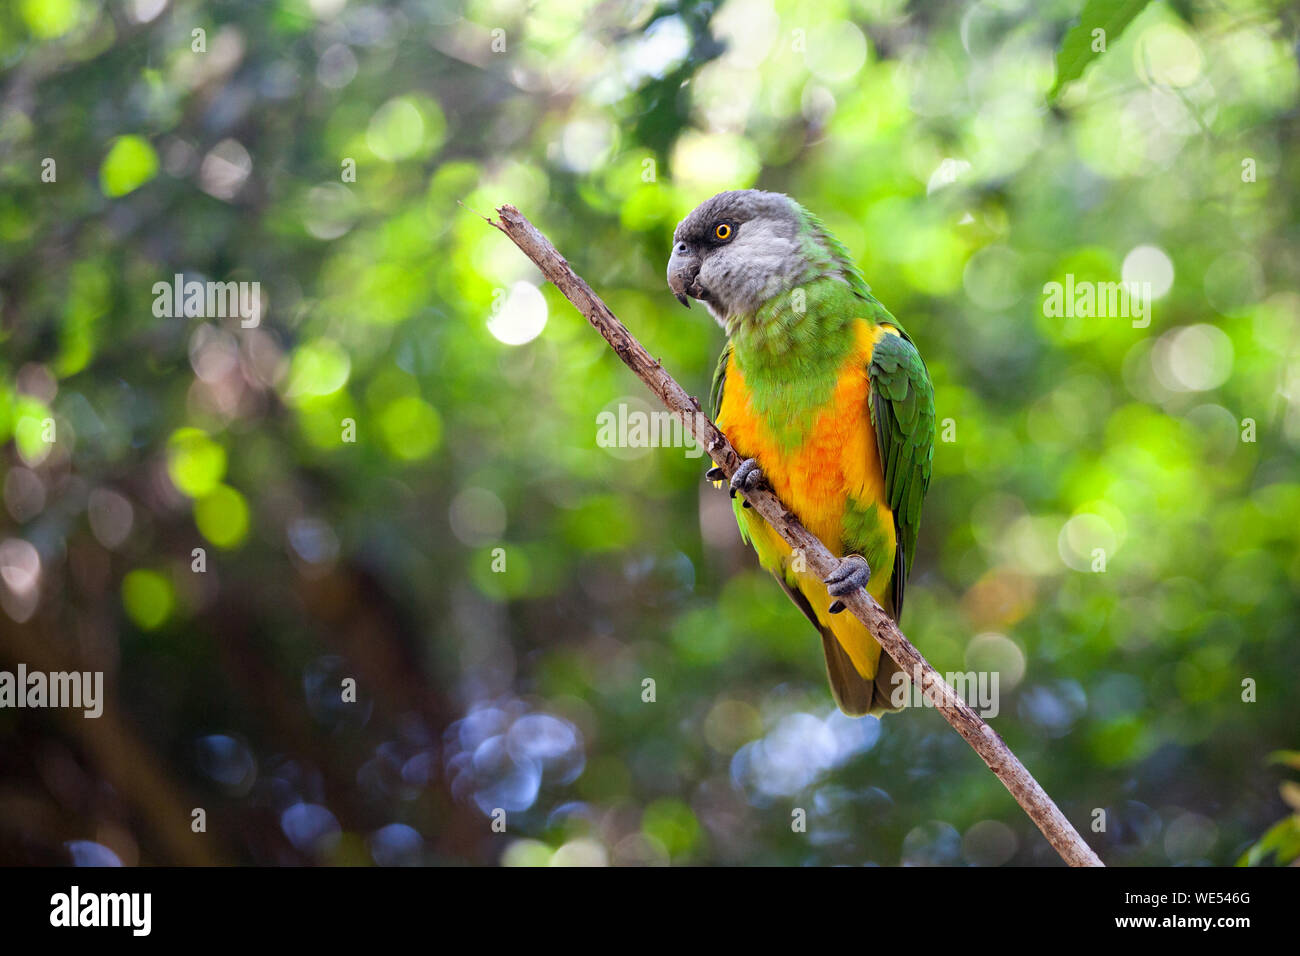 Senegal parrot or Poicephalus senegalus sits on green tree close up, yellow ang green color parakeet on branch Birds of eden aviary park, South Africa Stock Photo